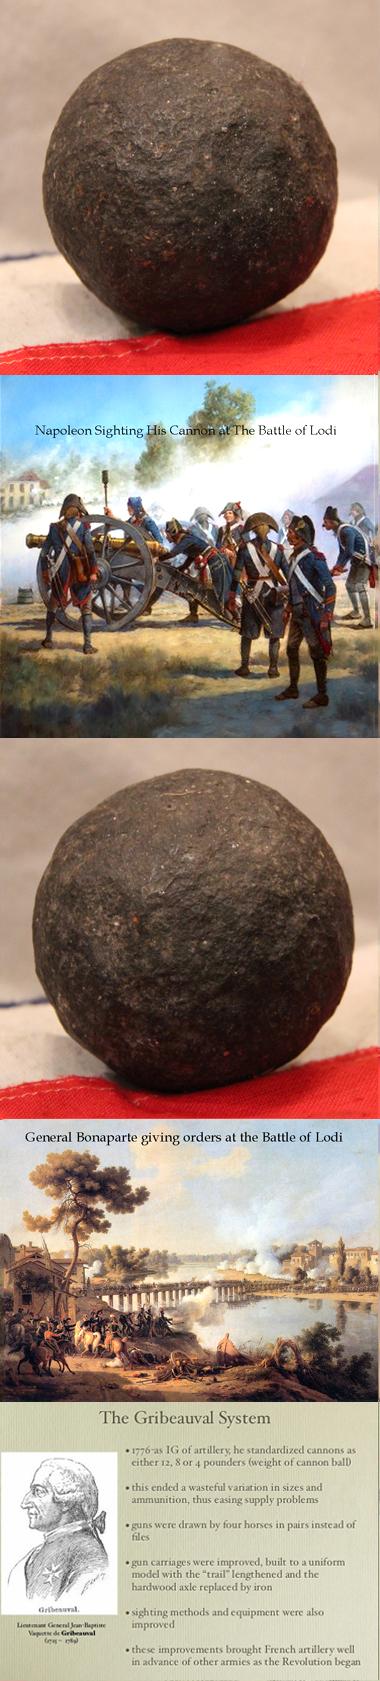 An Original Napoleonic Wars 4 Pounder Solid Shot Gribeauval Cannon Ball Fired From Napoleon's Artillery Battery in 1796